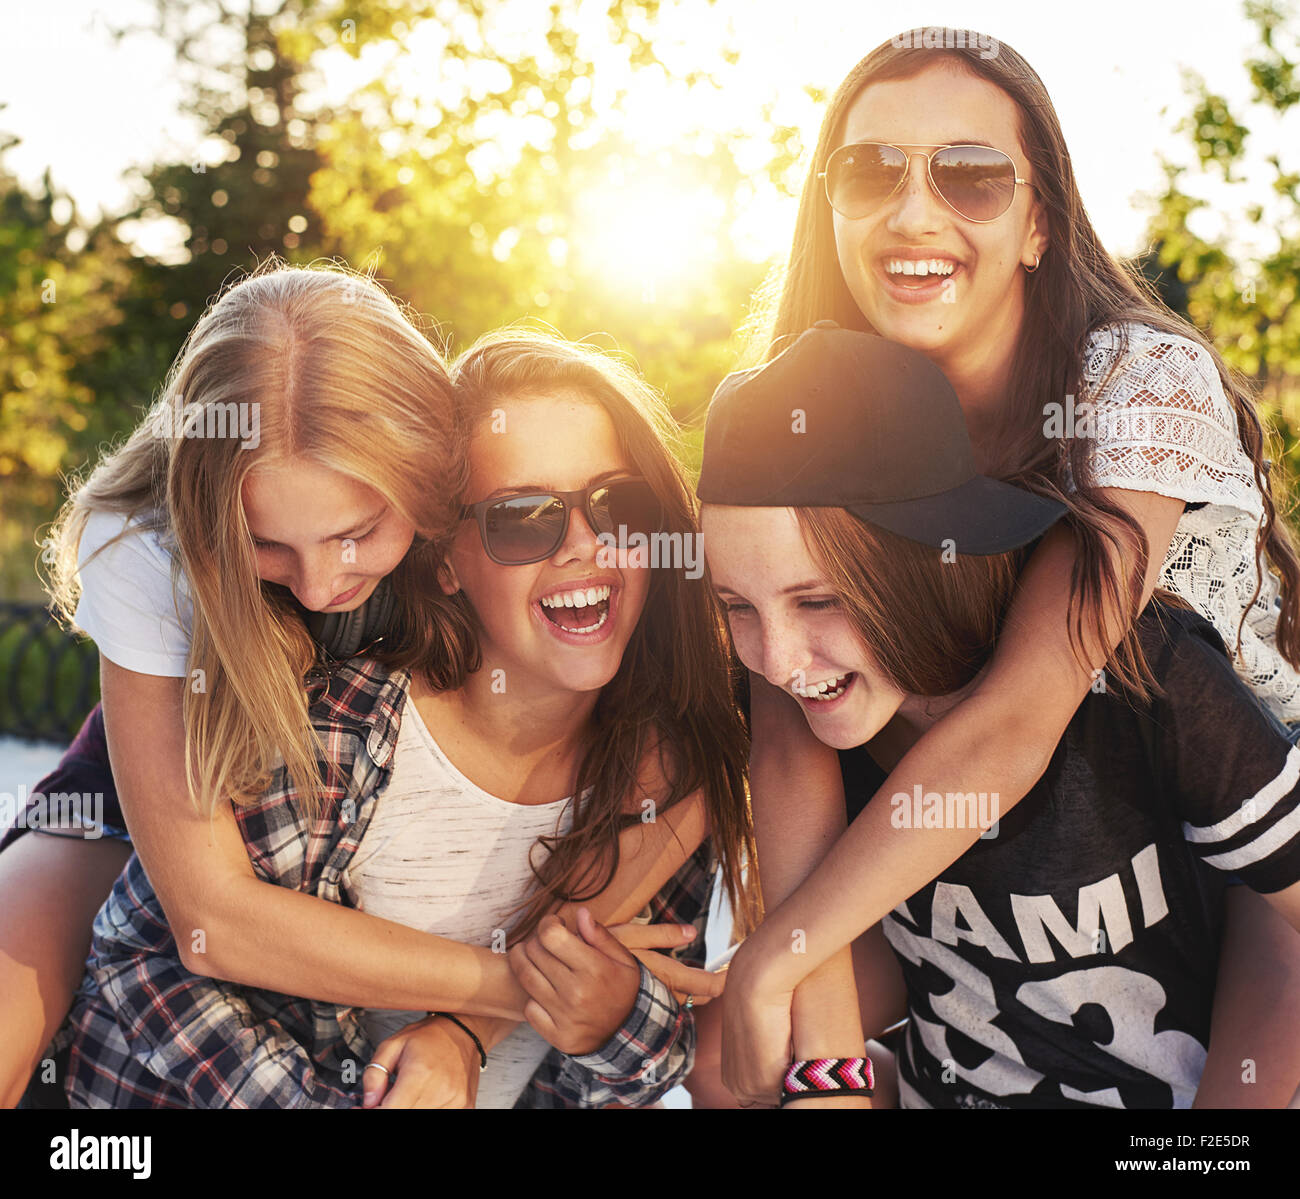 Group of friends laughing and having fun Stock Photo